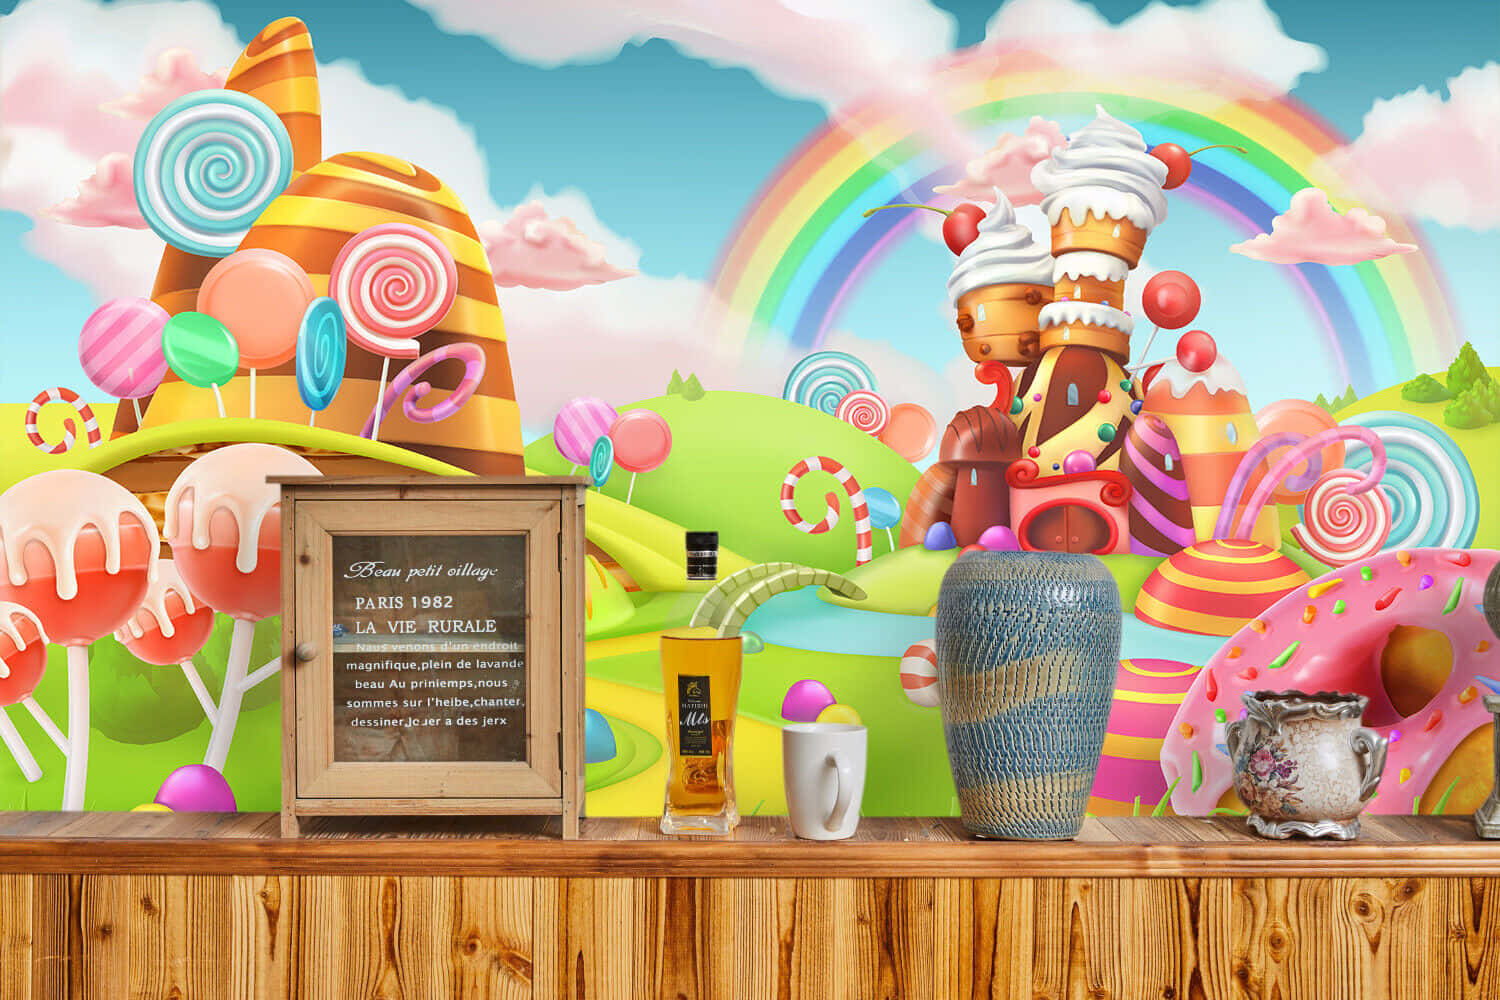 A delicious world of wonder awaits in Candyland